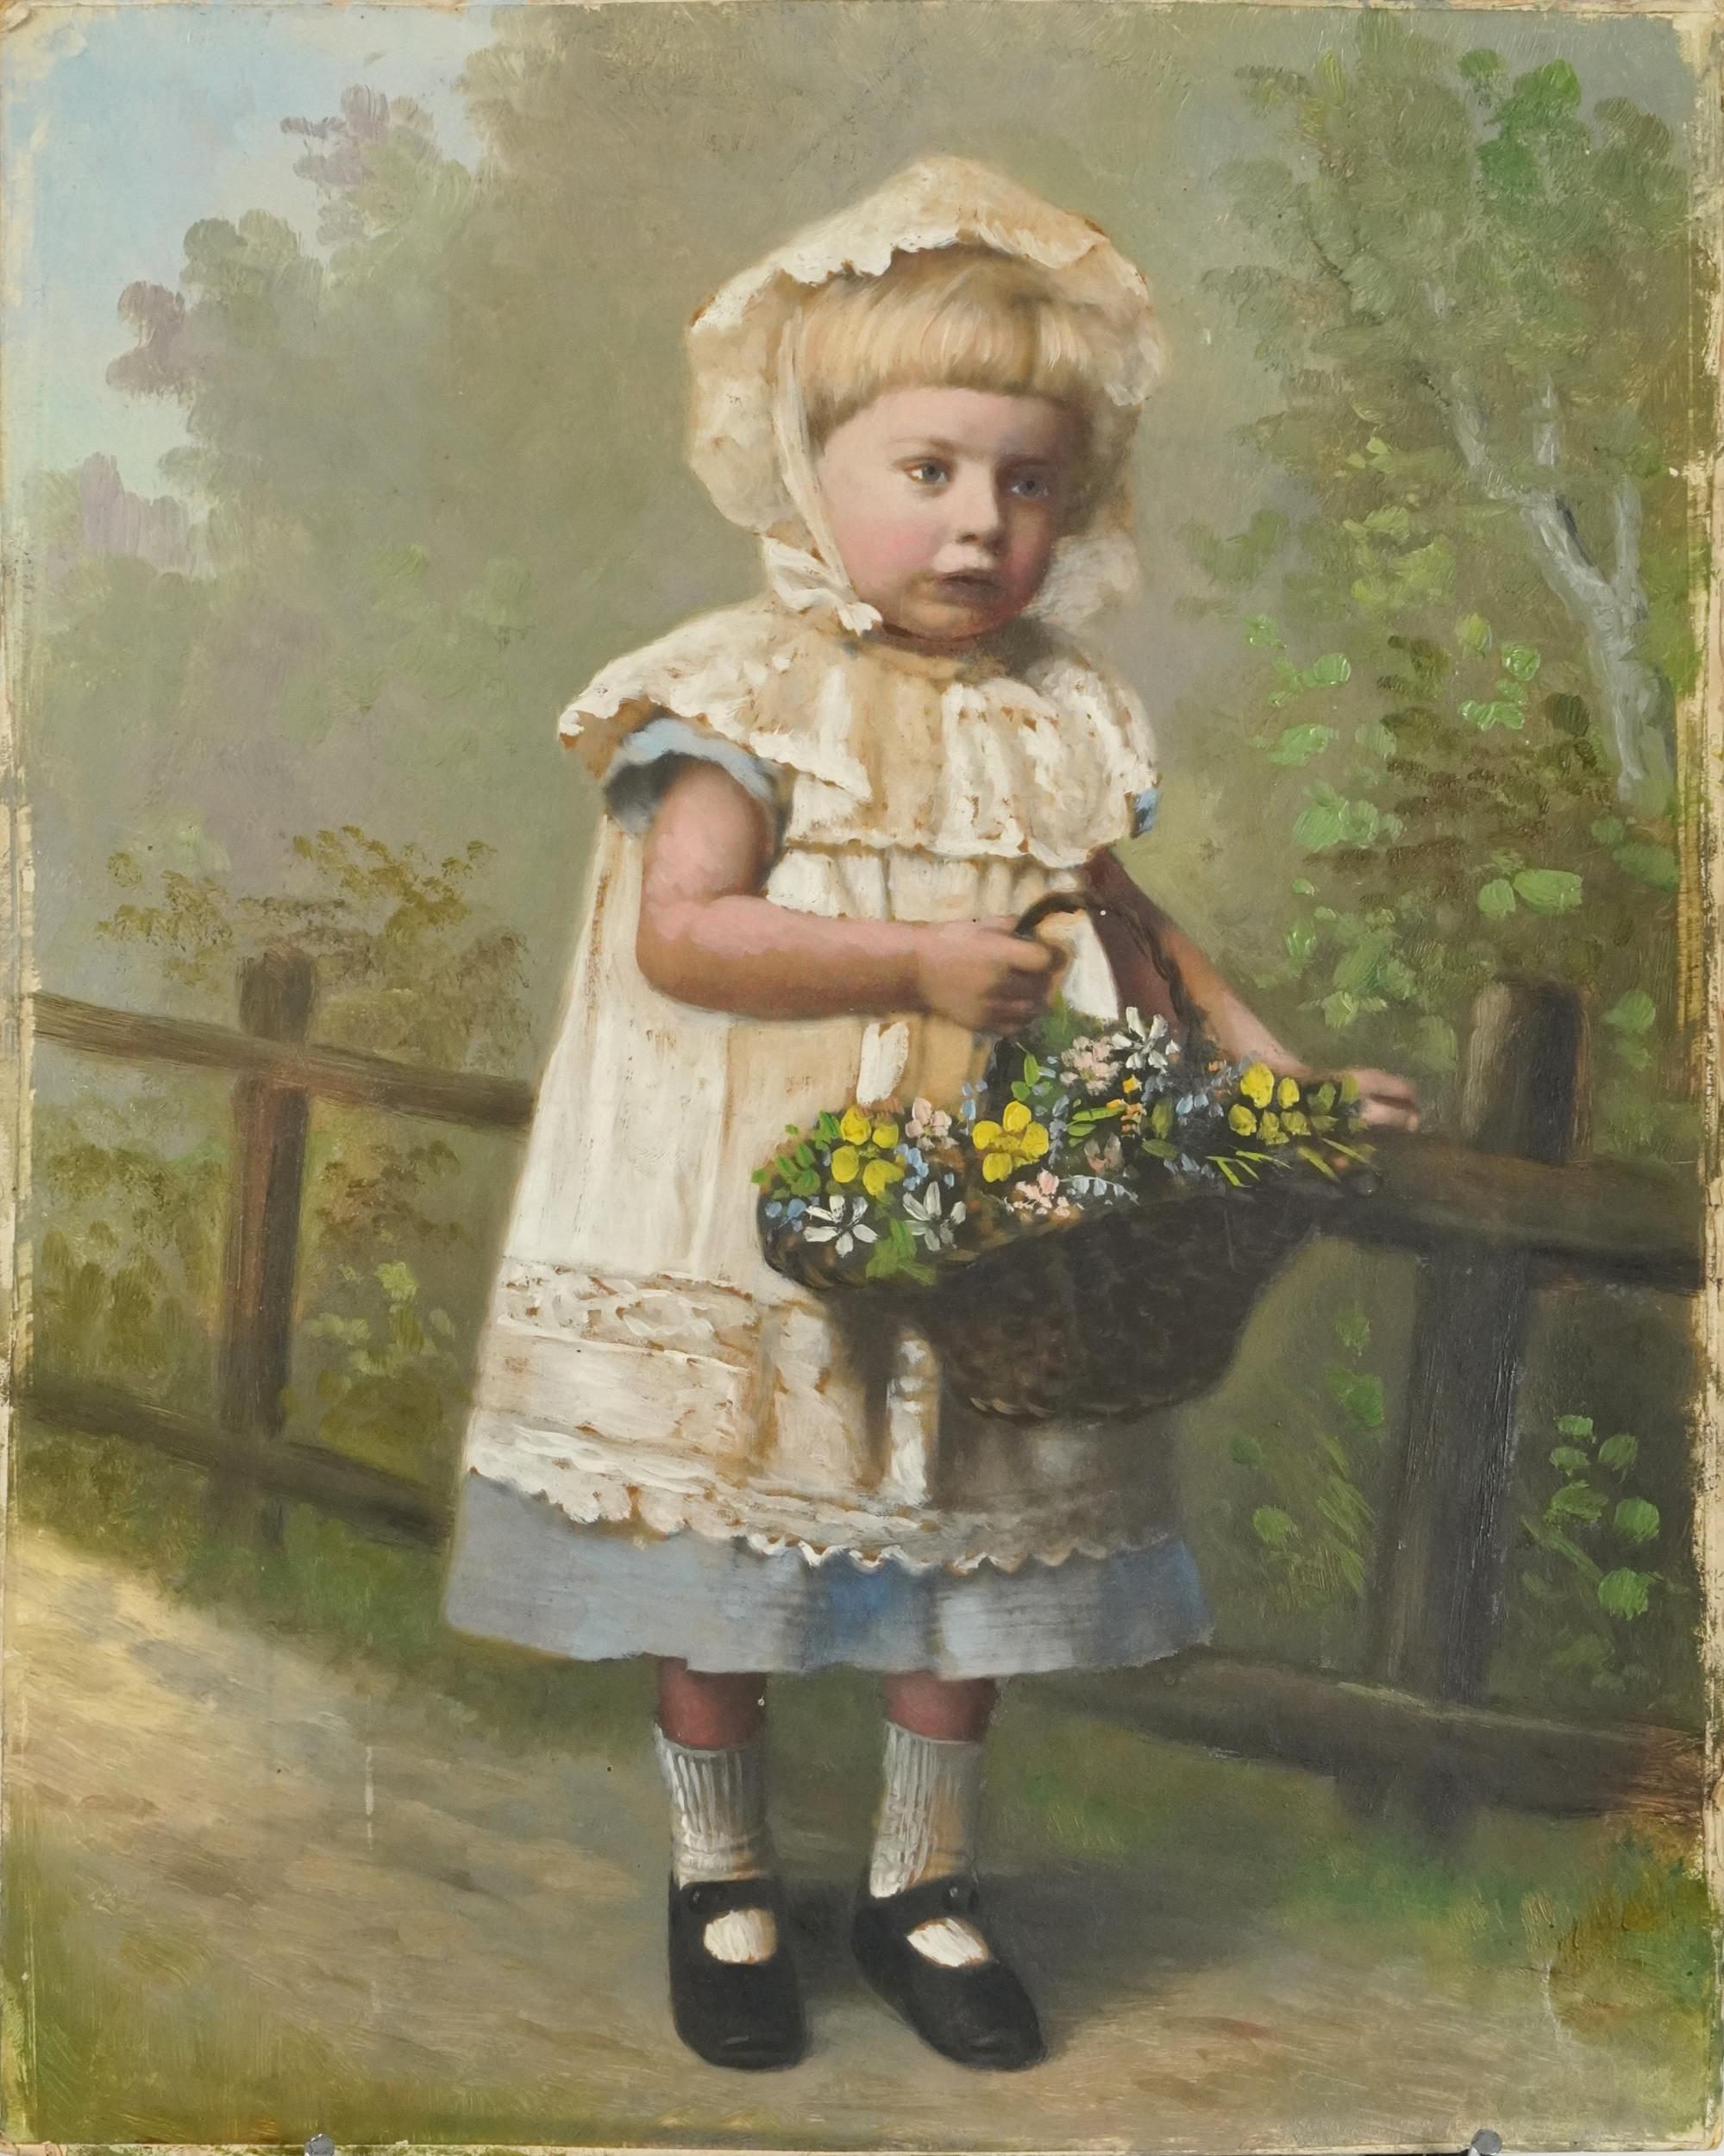 Portrait of a young girl wearing a white bonnet holding a basket of flowers beside a fence,